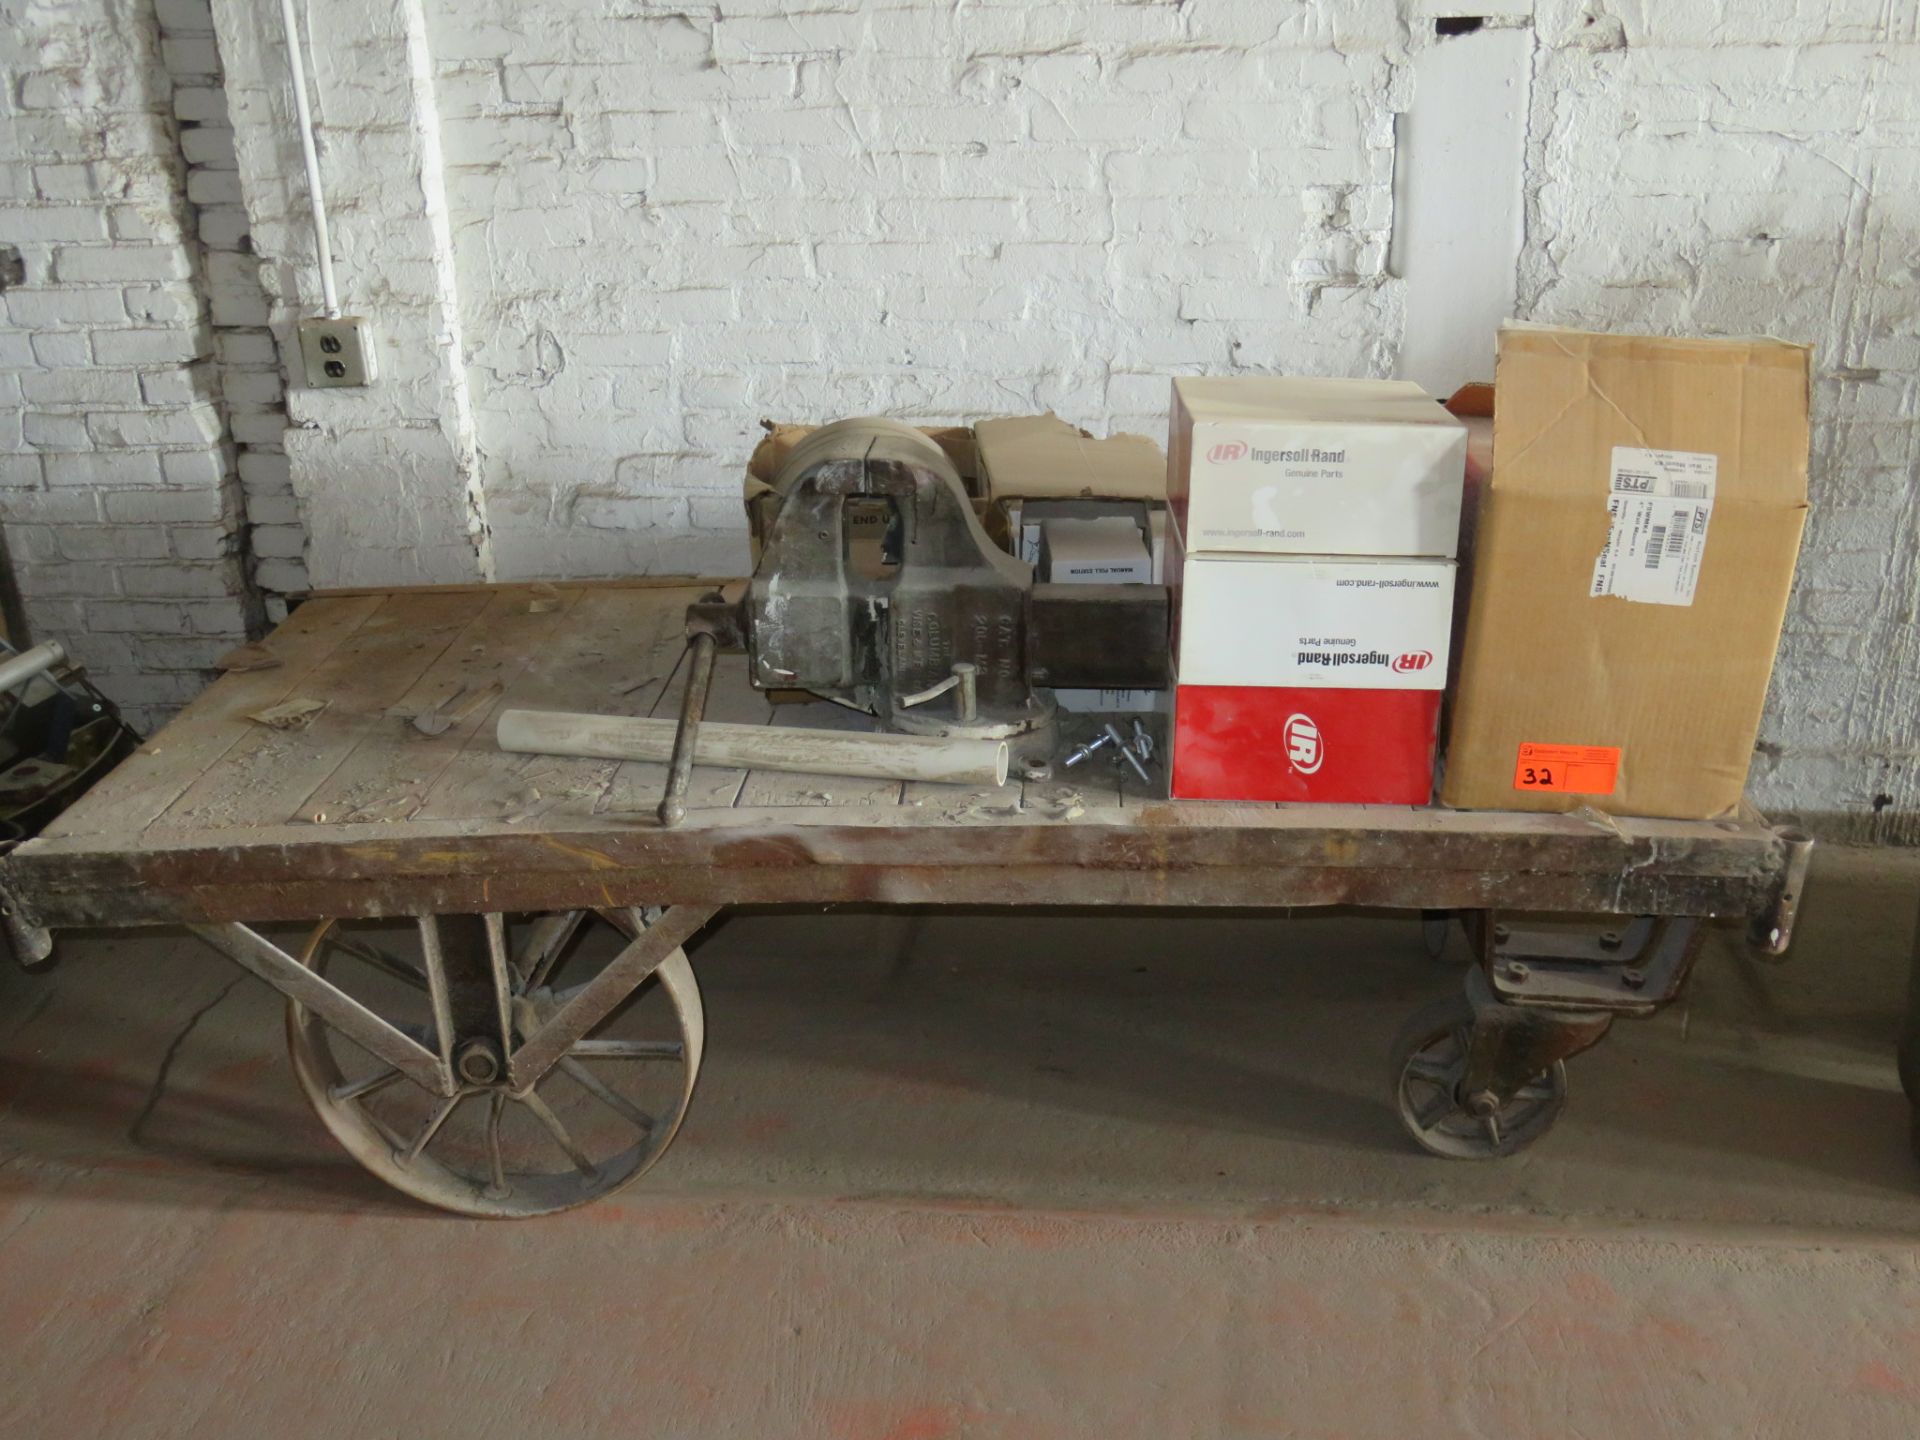 Railroad Cart with Contents approx cart size 73"x 36" x 19.5"